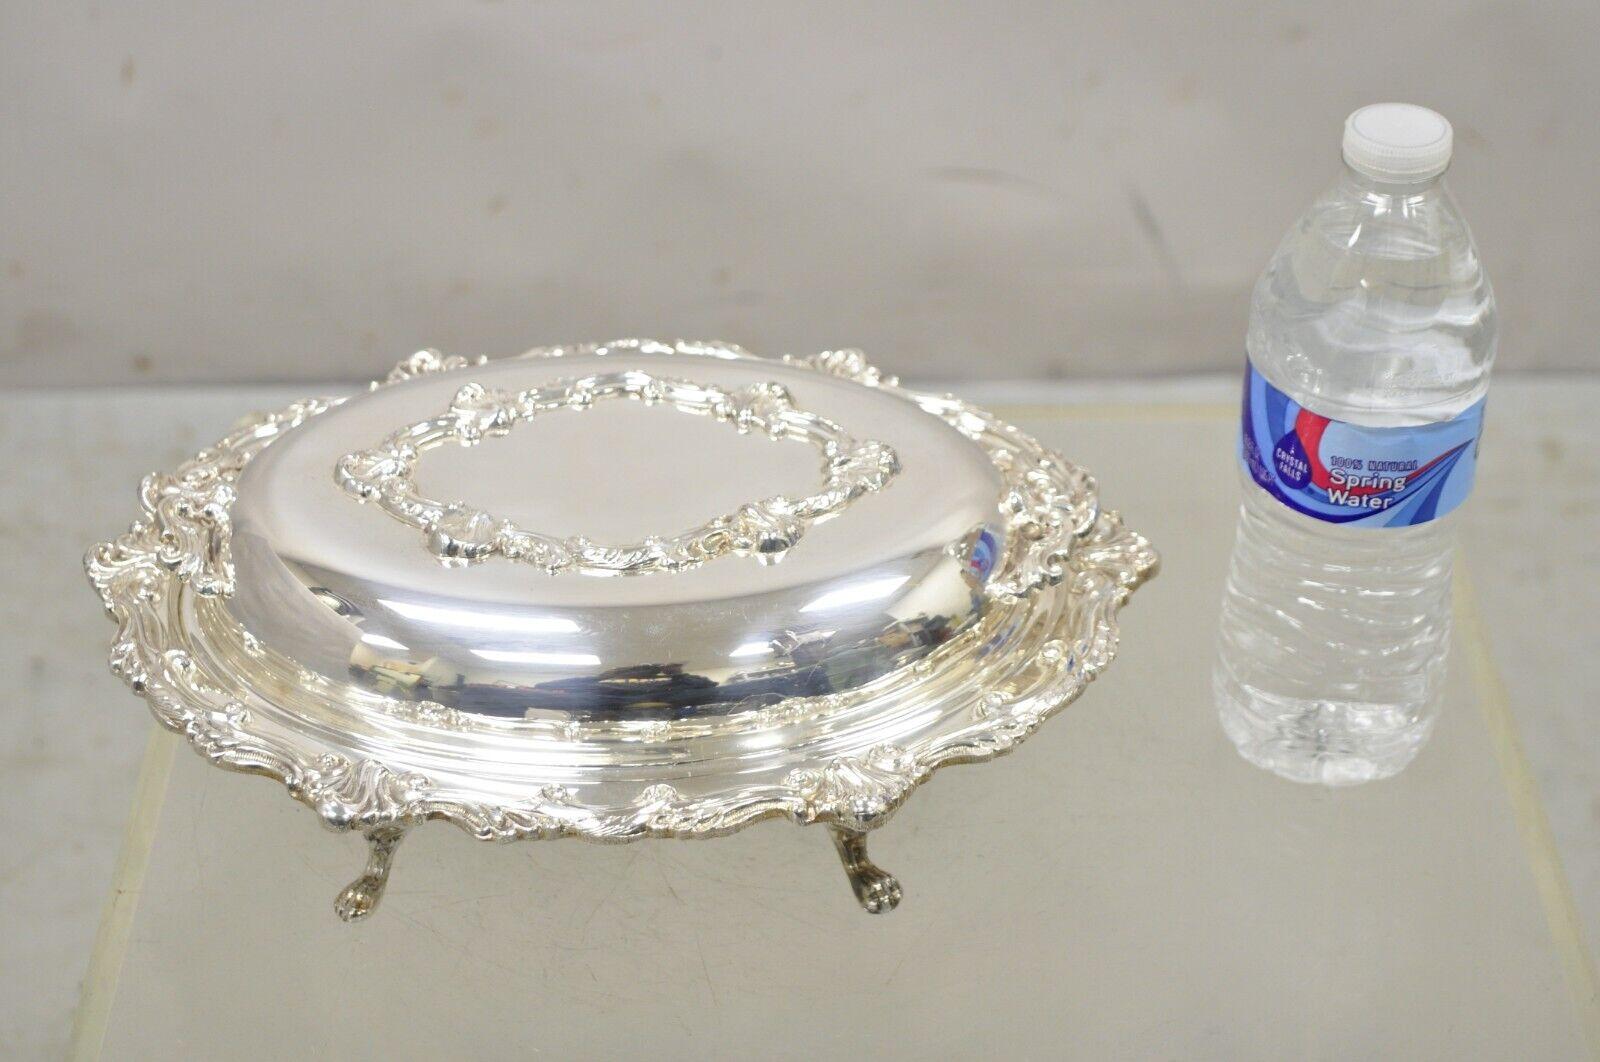 Victorian Style Silver Plated Ornate Lidded Twin Handle Vegetable Serving Dish. Item features ornate lidded dish, divided glass insert, ornate twin handles, original hallmark, very nice vintage item, great style and form. circa Mid-20th century.